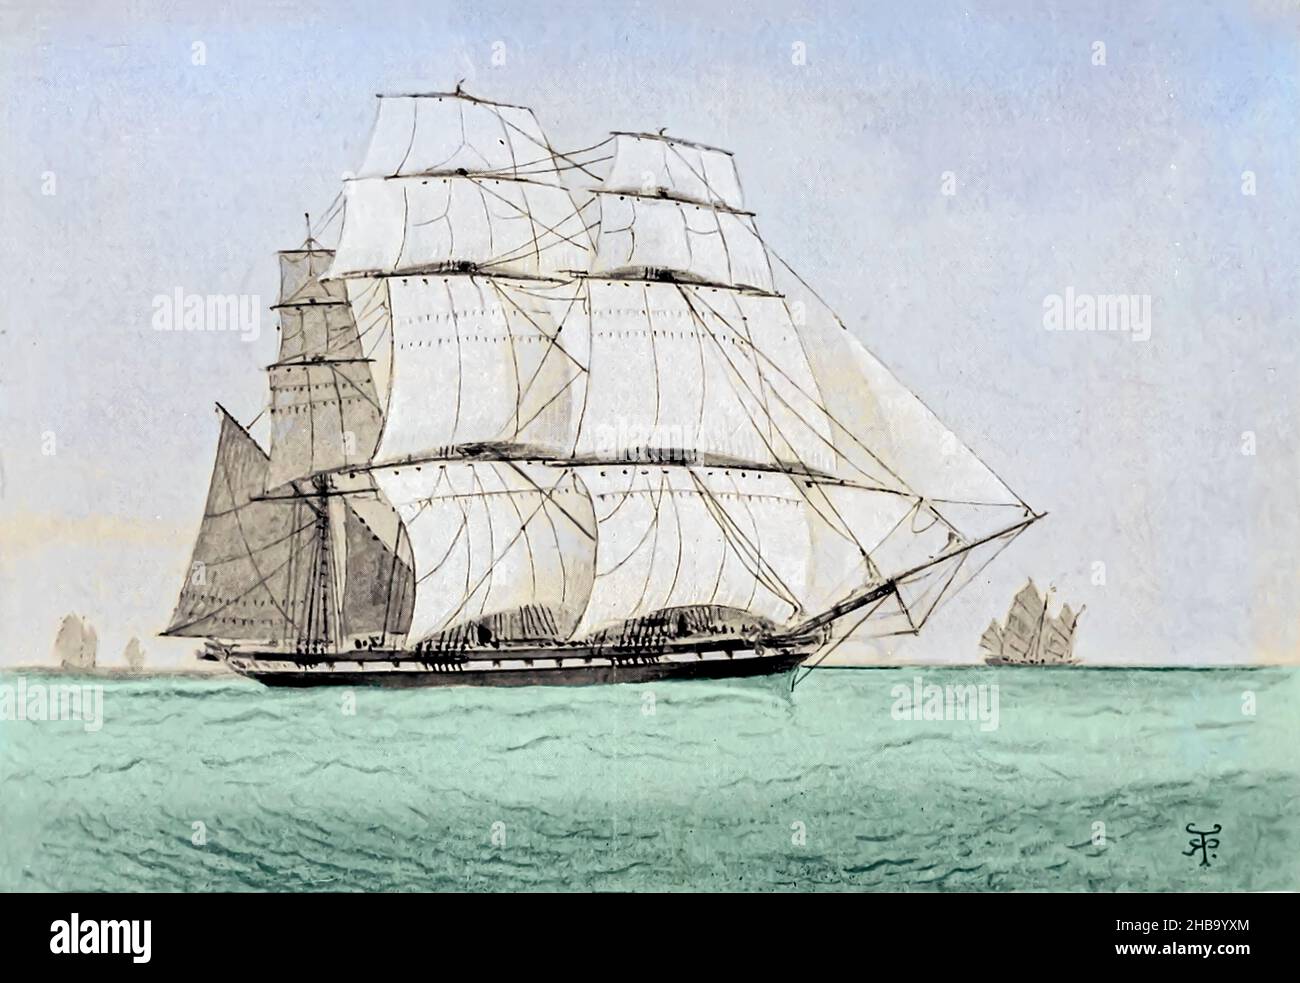 Coloured illustration of a China tea clipper from the book 'Pen and Pencil Sketches of Shipping and Craft All Round the World' by Robert Taylor Pritchett. Published in London, Great, Britain, in 1899. Stock Photo